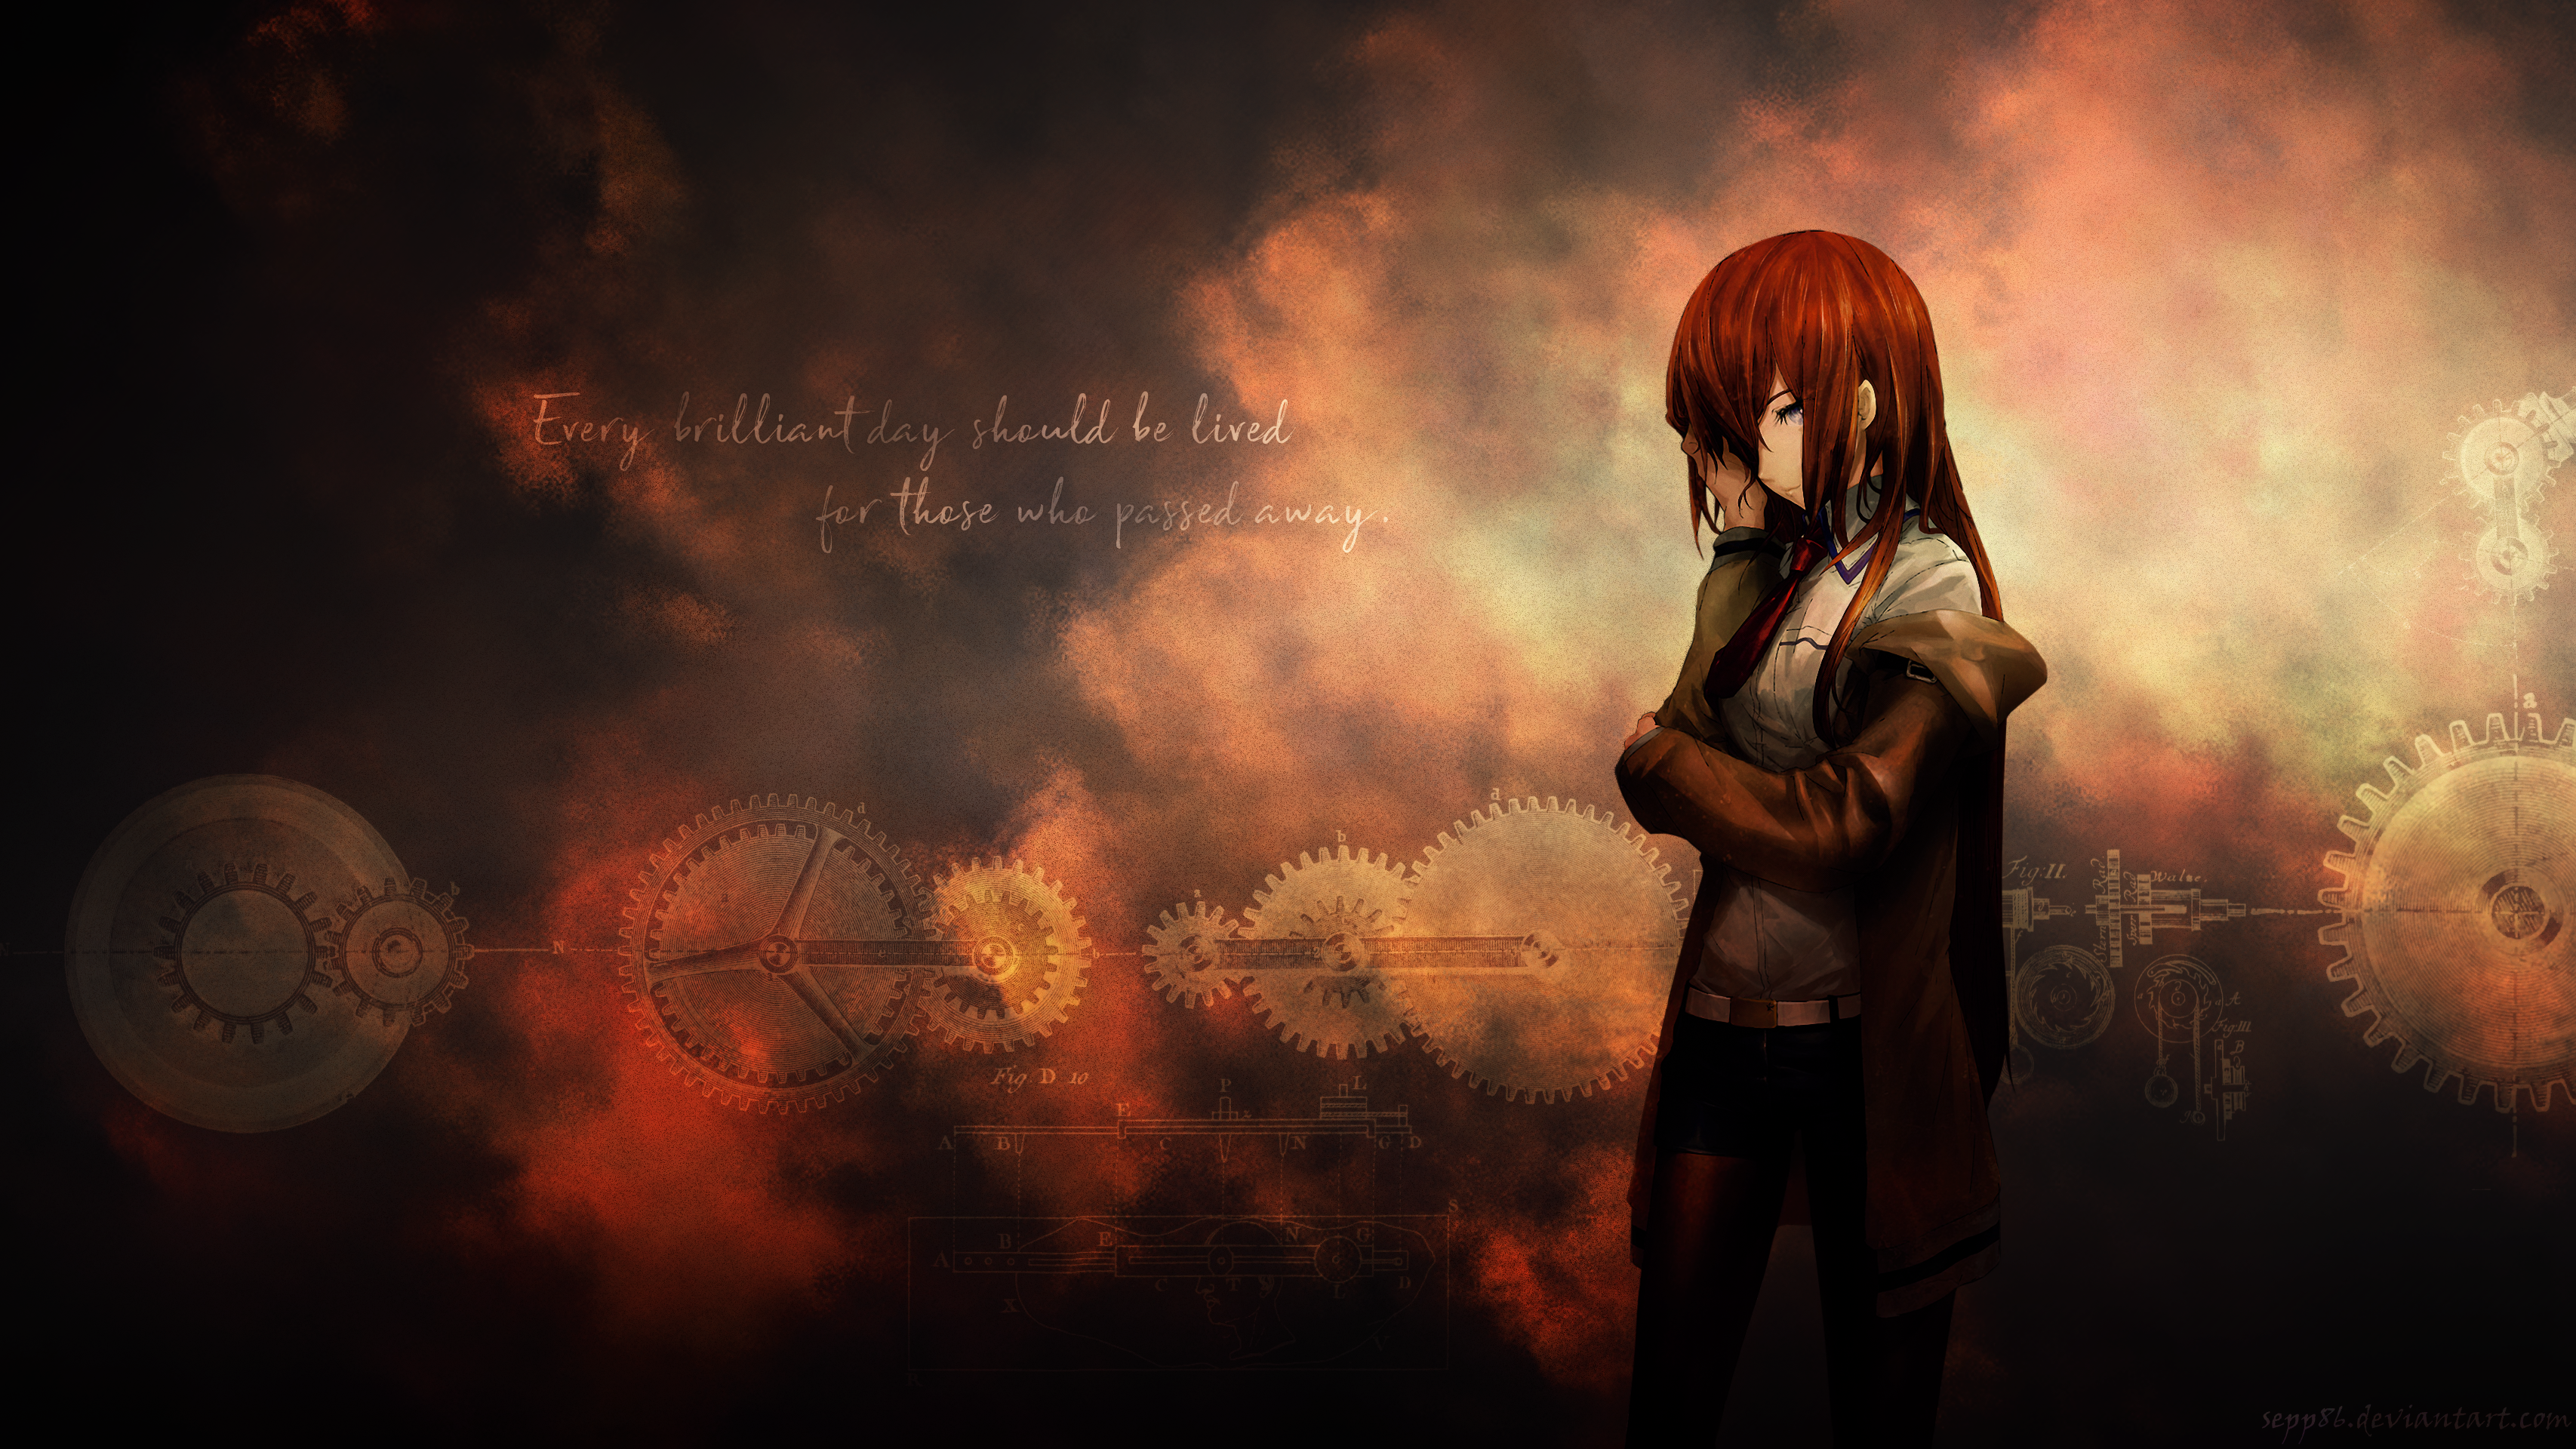 Anime Steins;Gate HD Wallpaper | Background Image